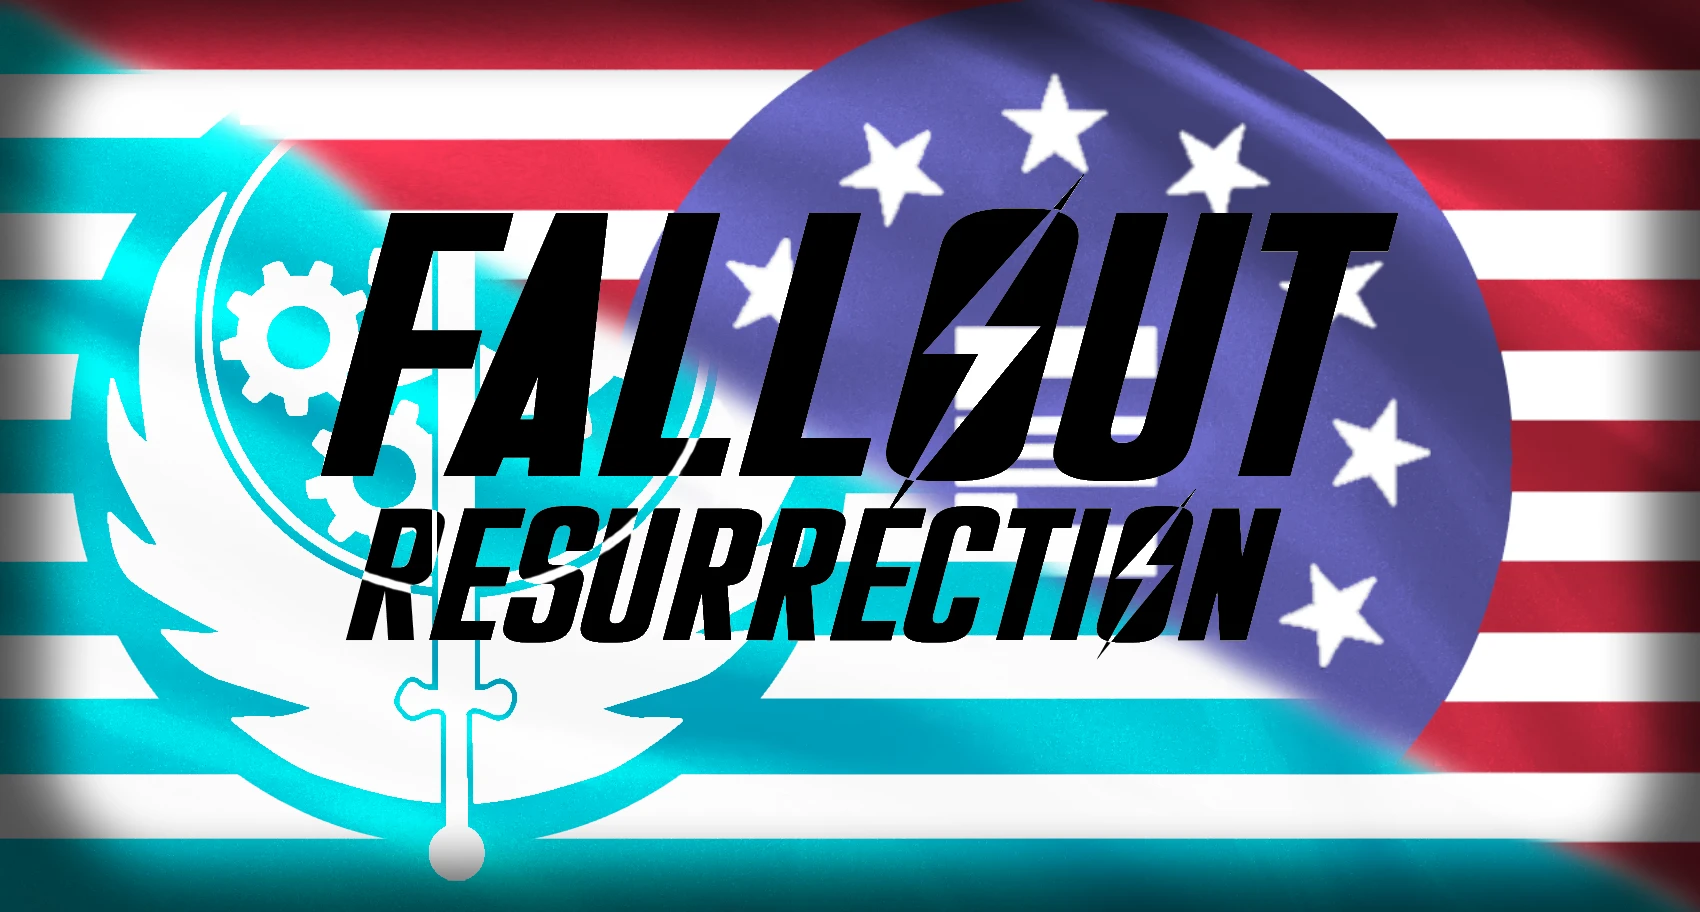 download free fallout 1.5 resurrection